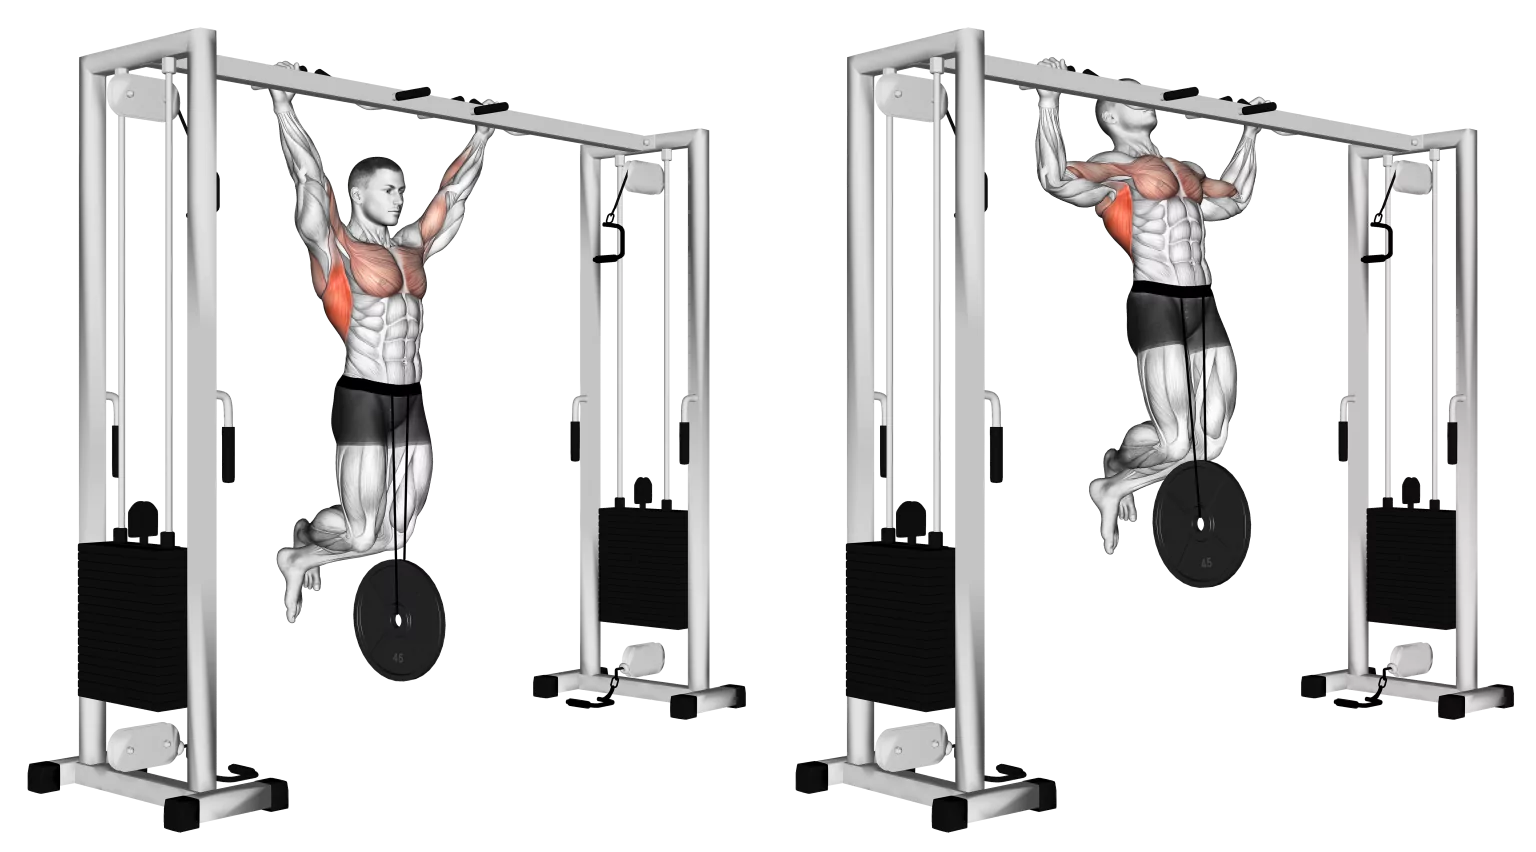 Weighted Pull Ups - Pull Up